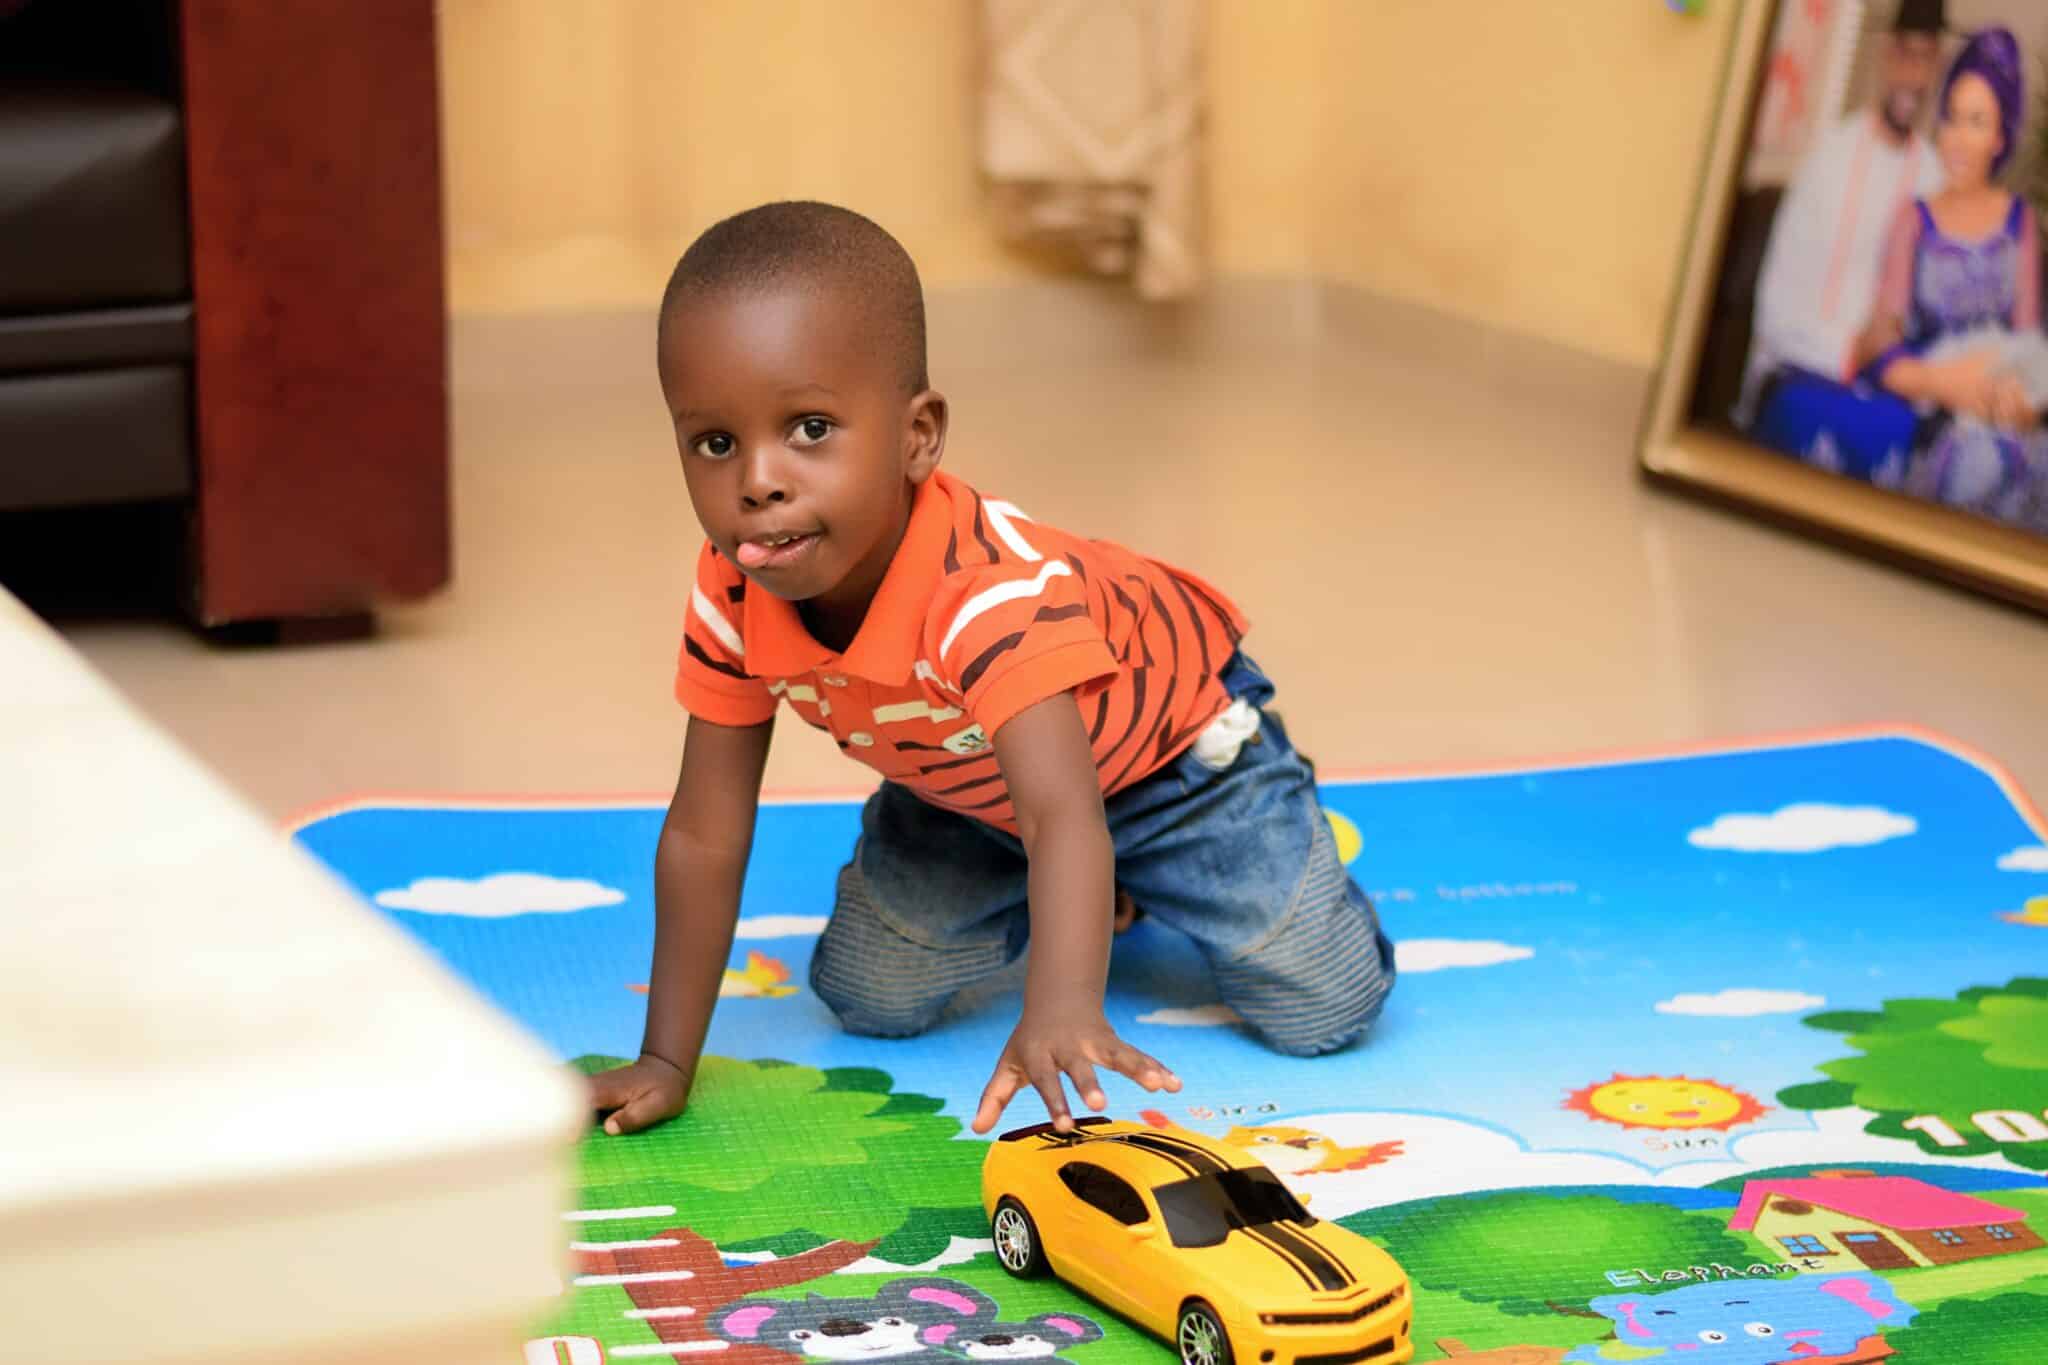 Little boy playing on a colorful mat in daycare.